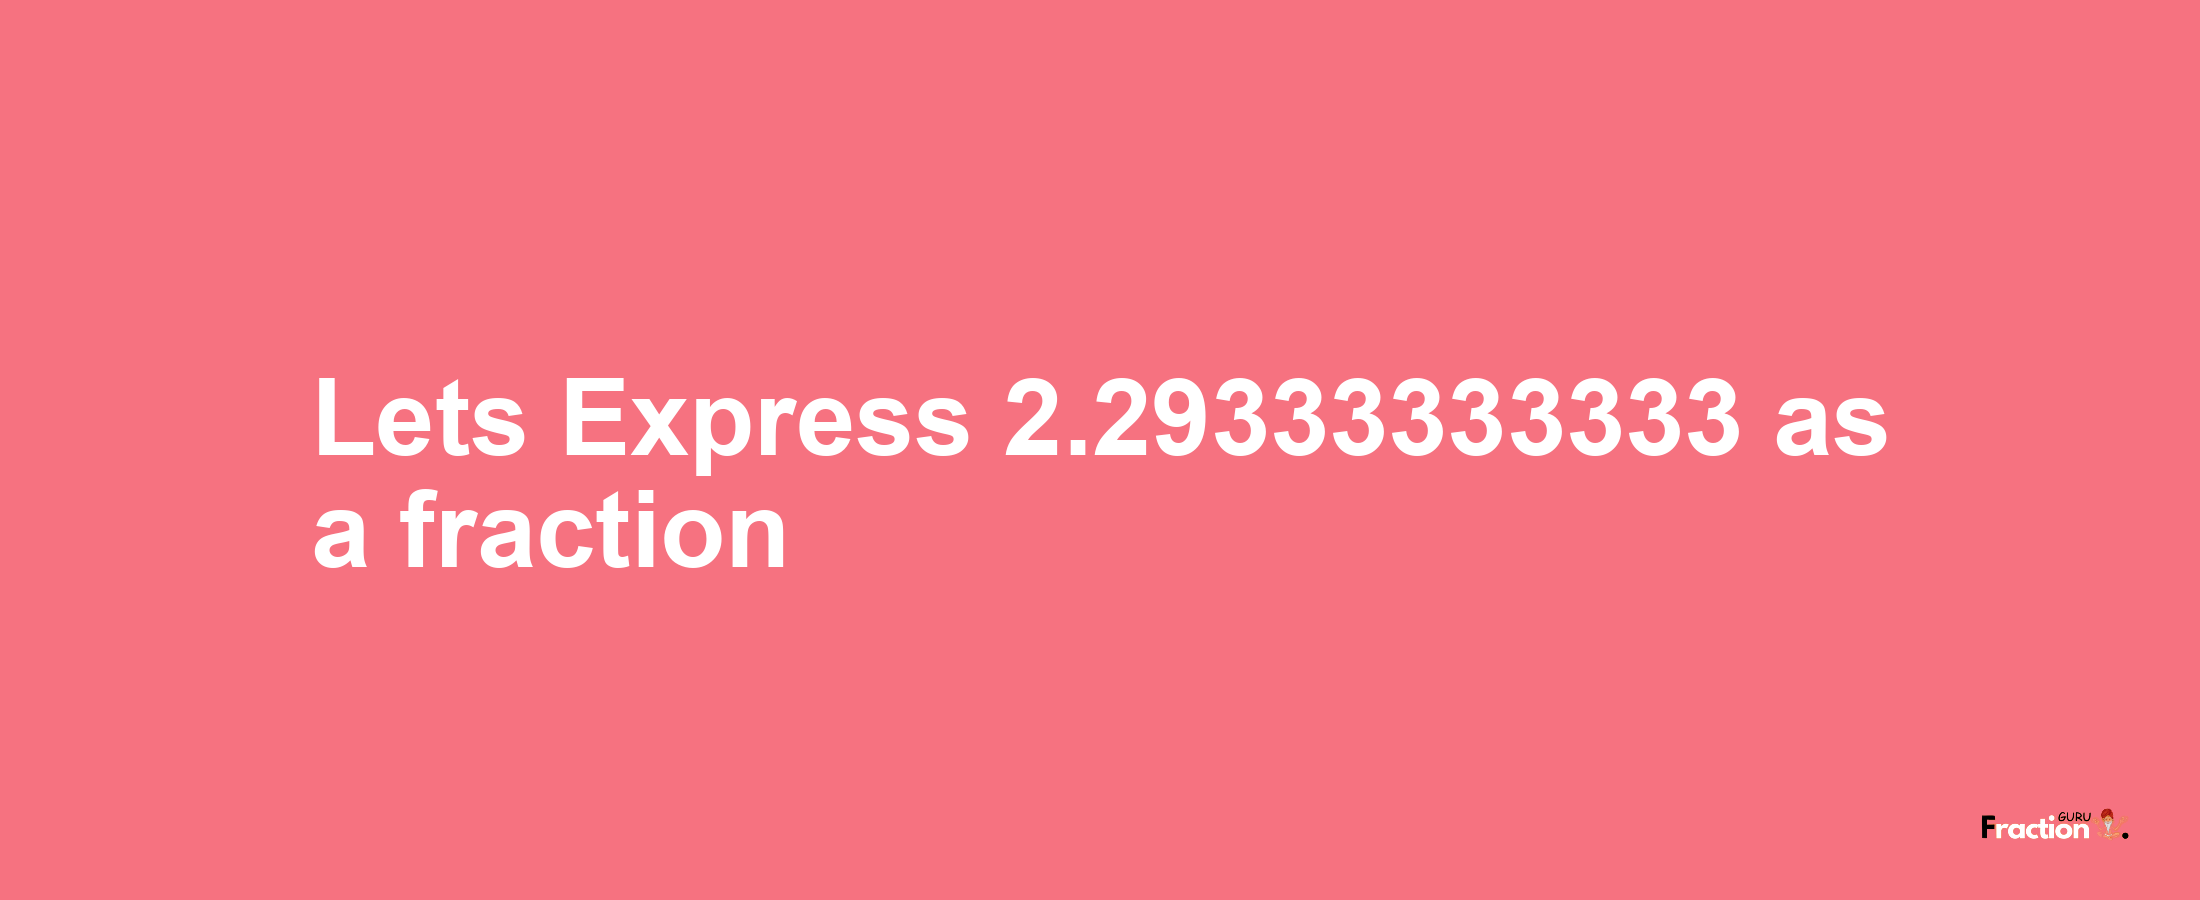 Lets Express 2.29333333333 as afraction